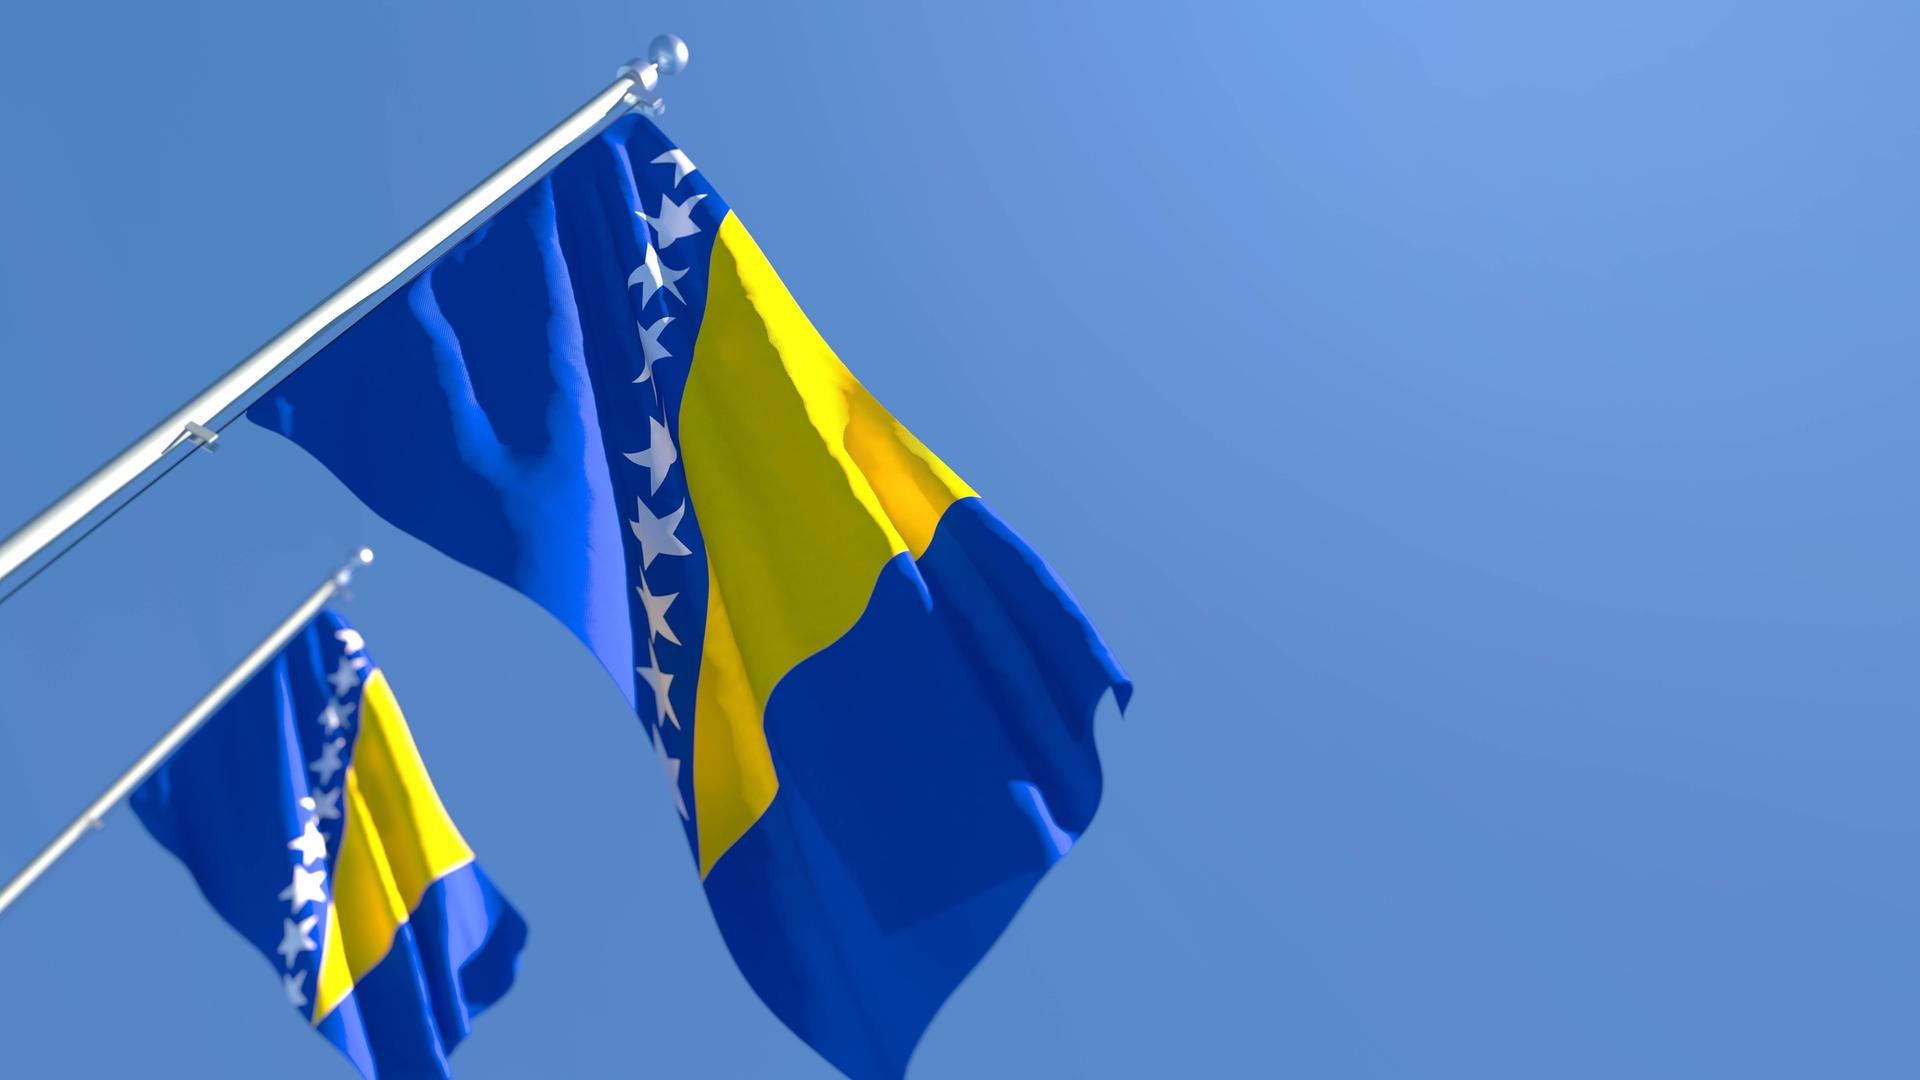 3D rendering of the national flag of Bosnia and Herzegovina waving in the wind against a blue sky , 33004266.jpg, bosnia